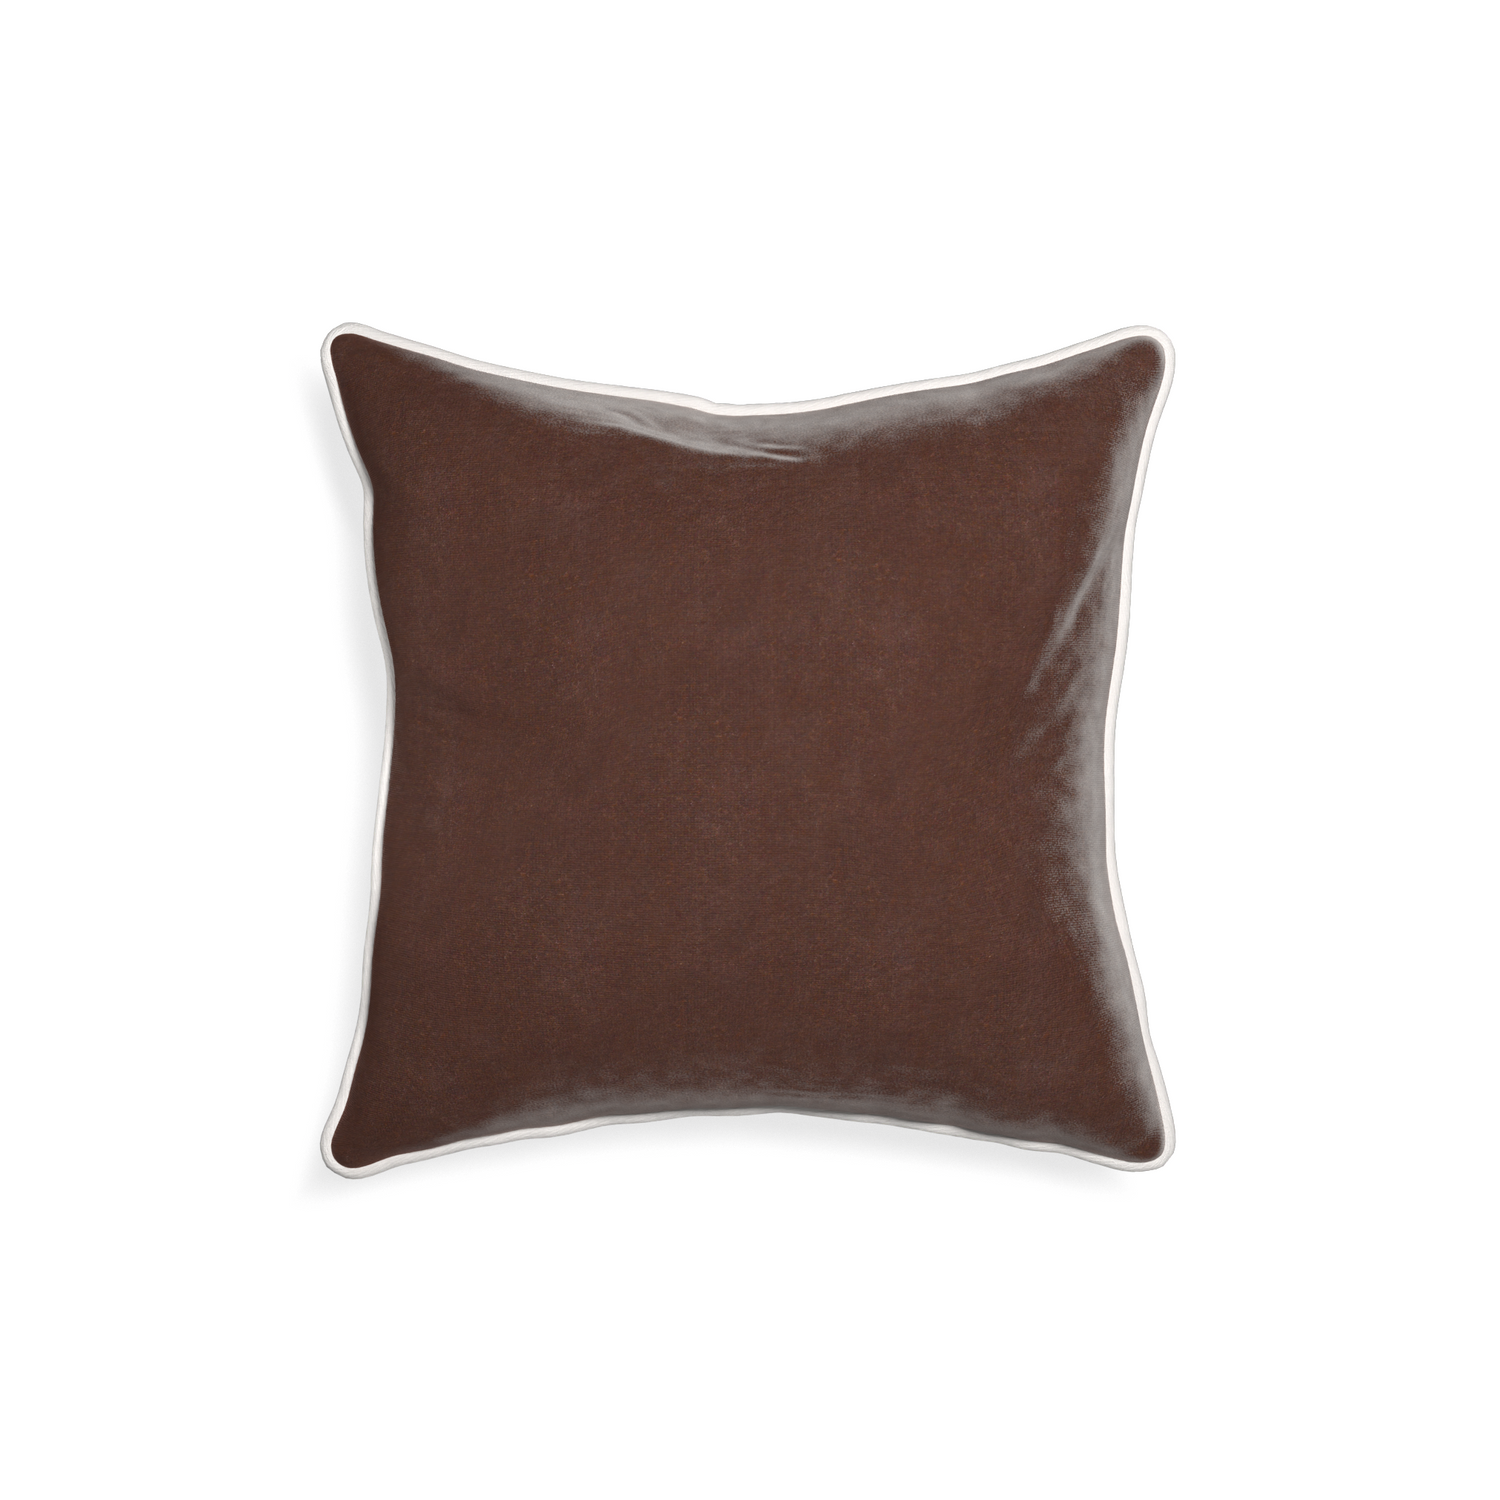 18-square walnut velvet custom pillow with snow piping on white background